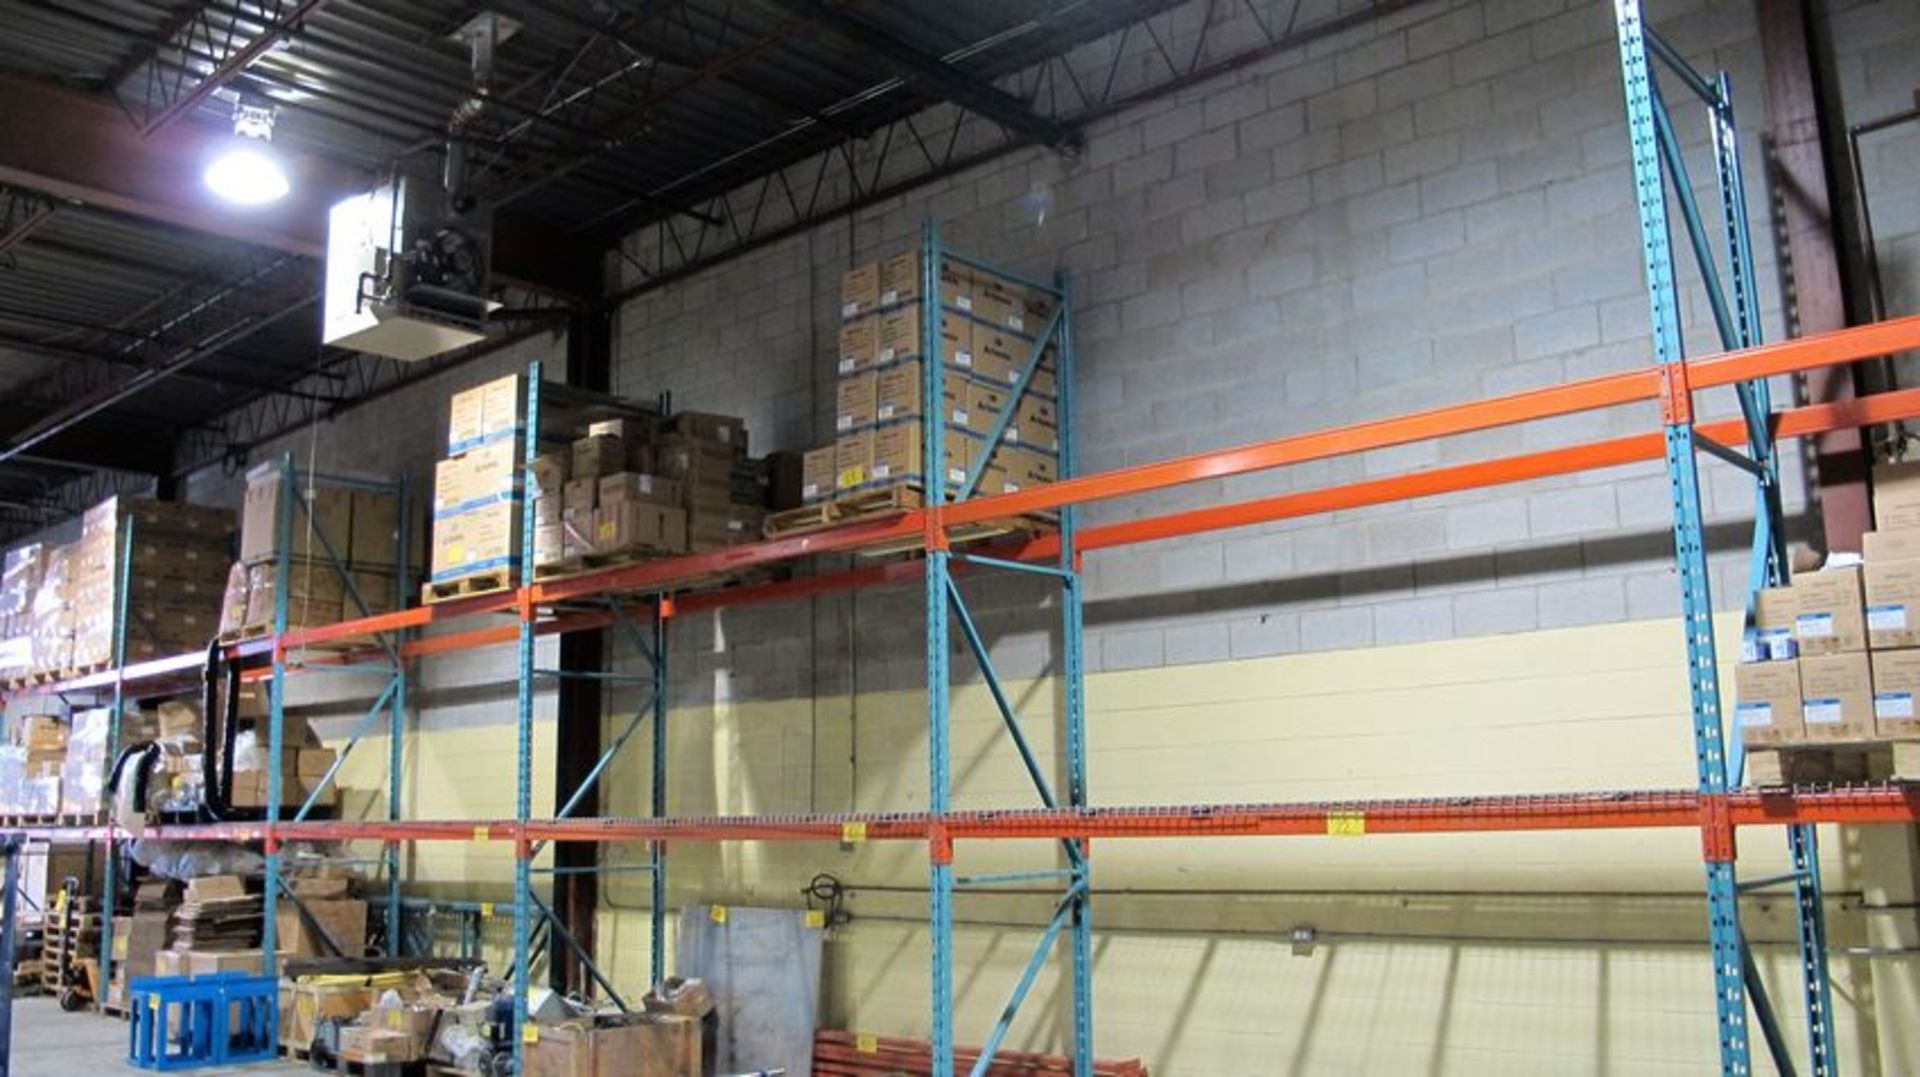 SECTIONS OF APPROX. 15'H X 12'L X 42"W PALLET RACKING INCL. (12) UPRIGHTS, (41) CROSSBEAMS, (21)